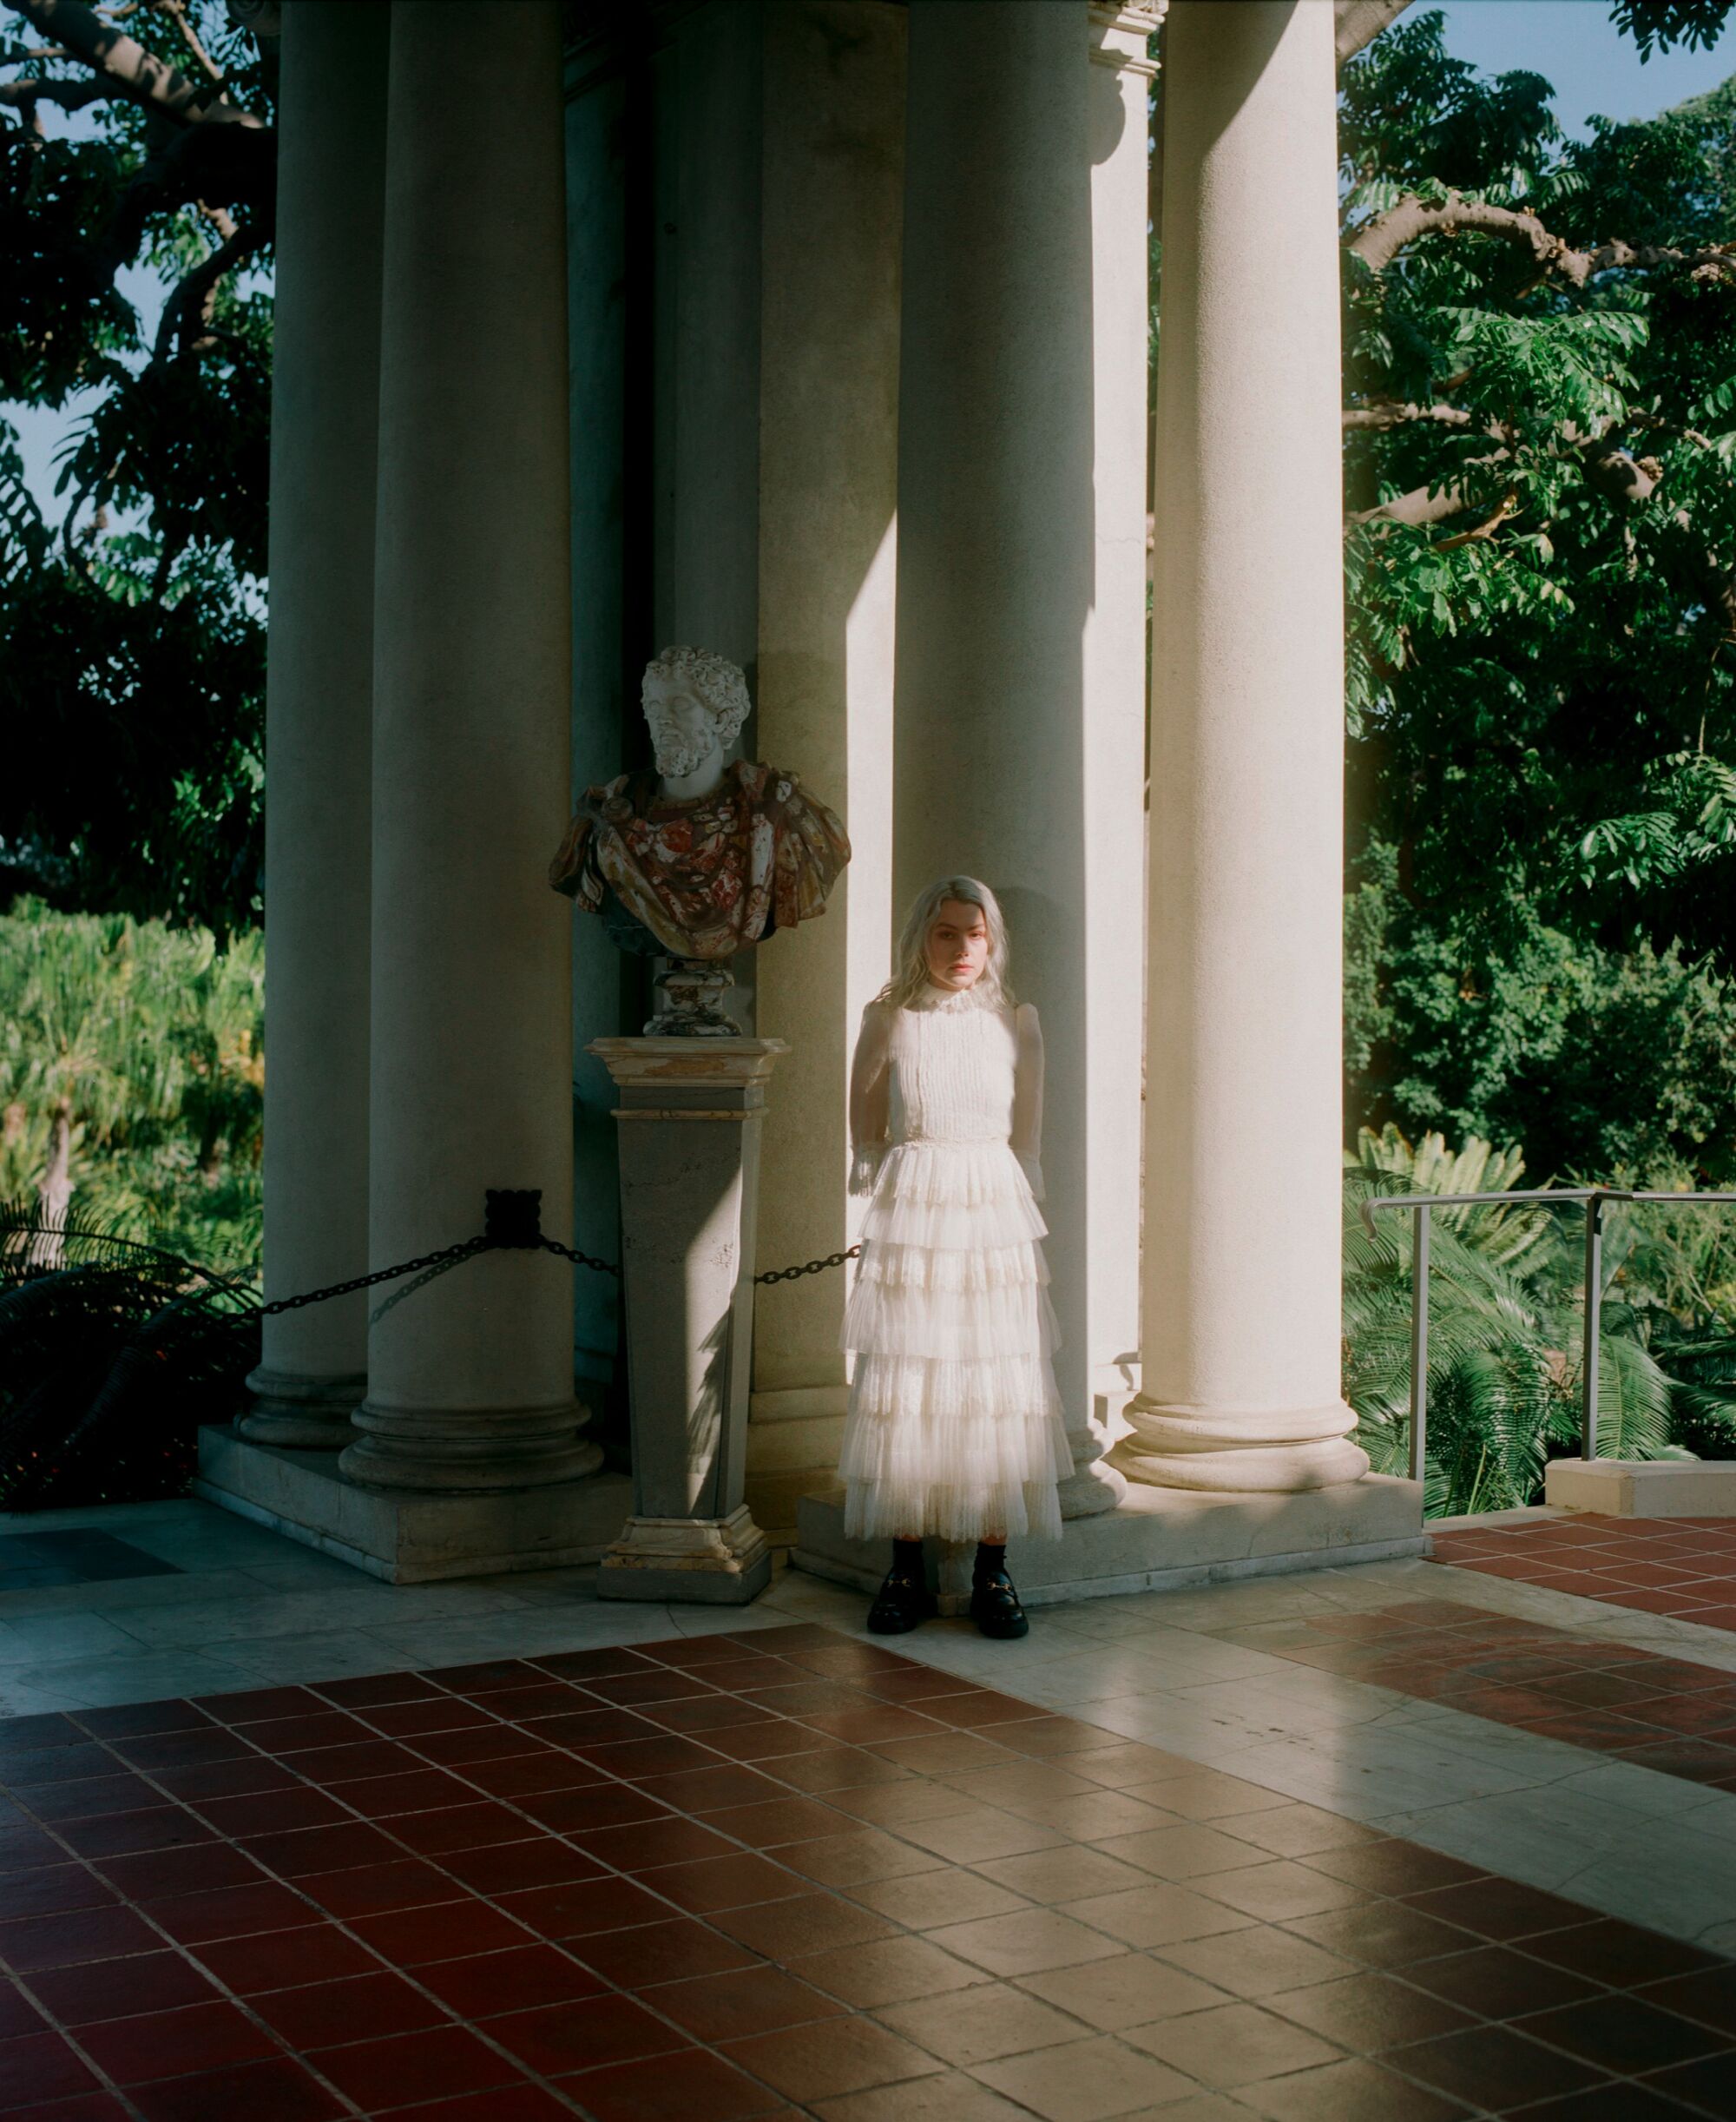 A woman in a white dress leans against a column next to a stone bust of a man.